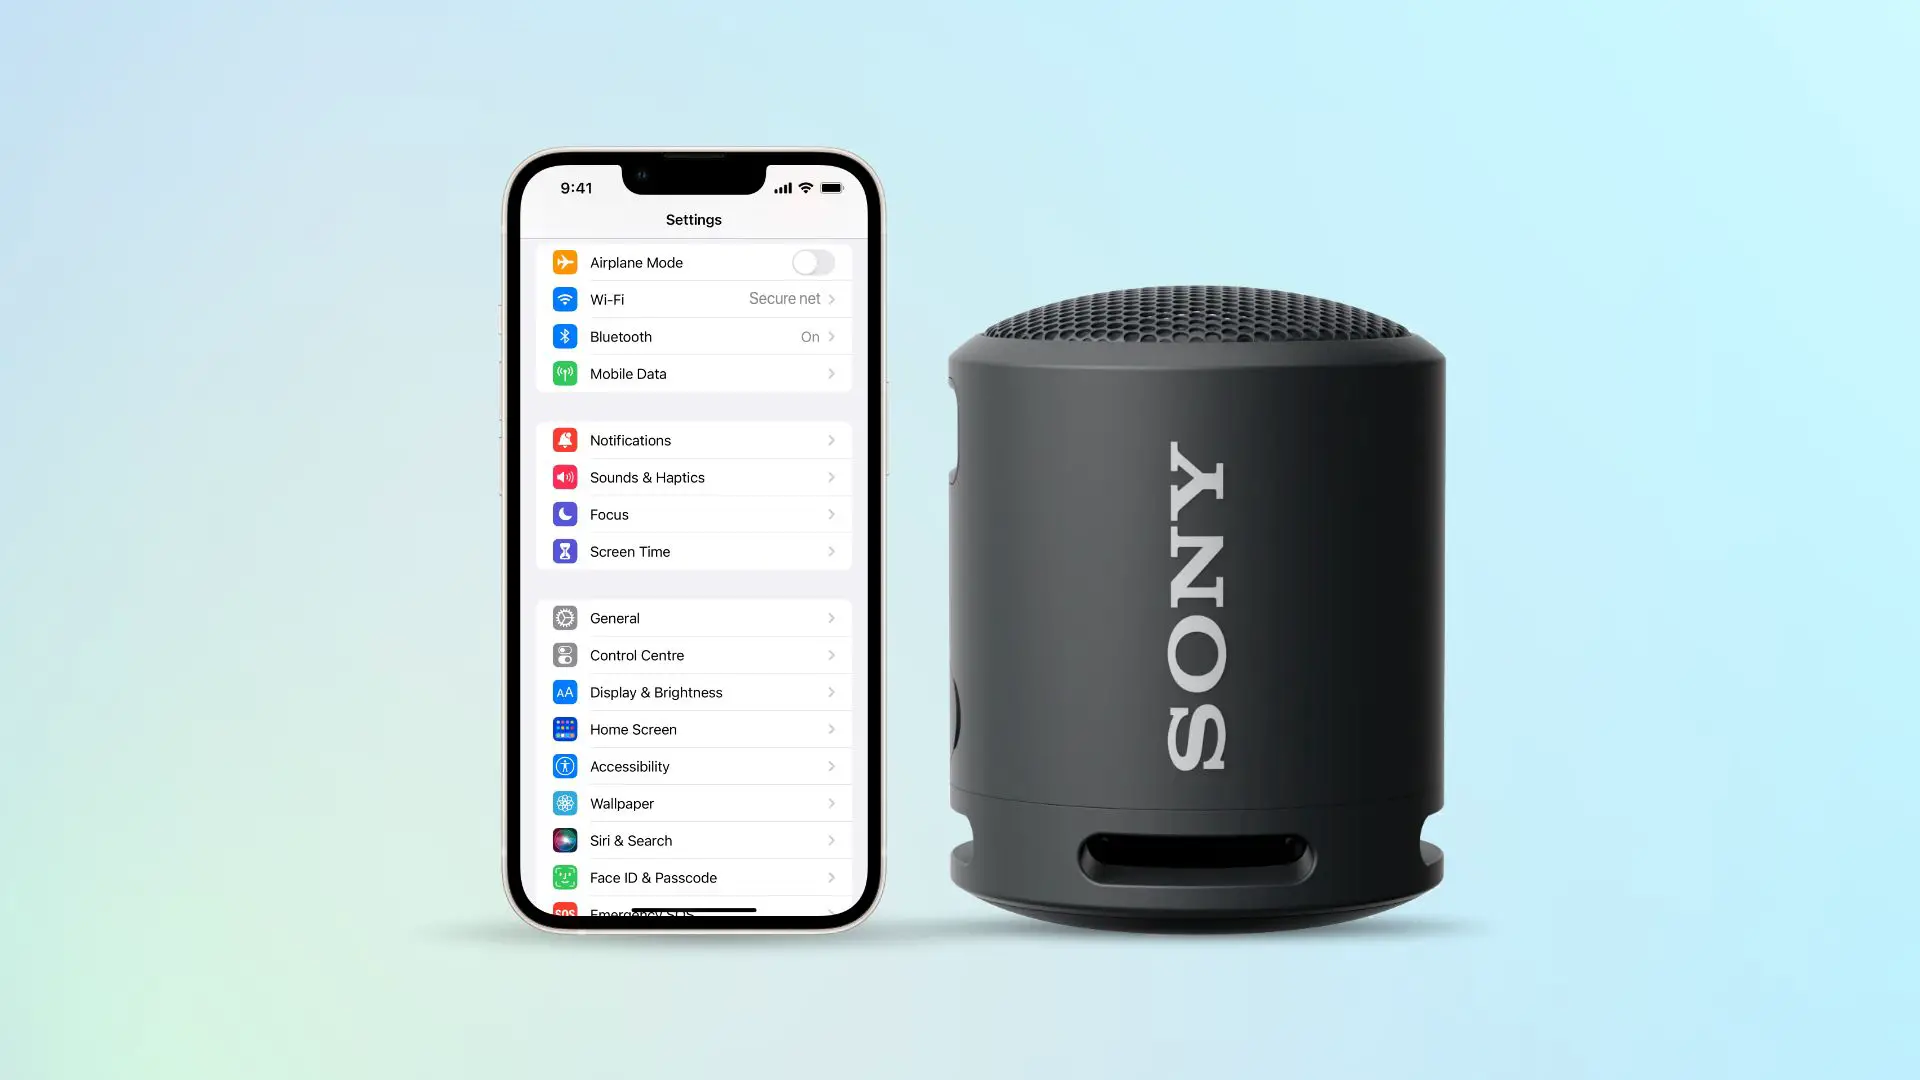 How to pair Sony speaker to iPhone